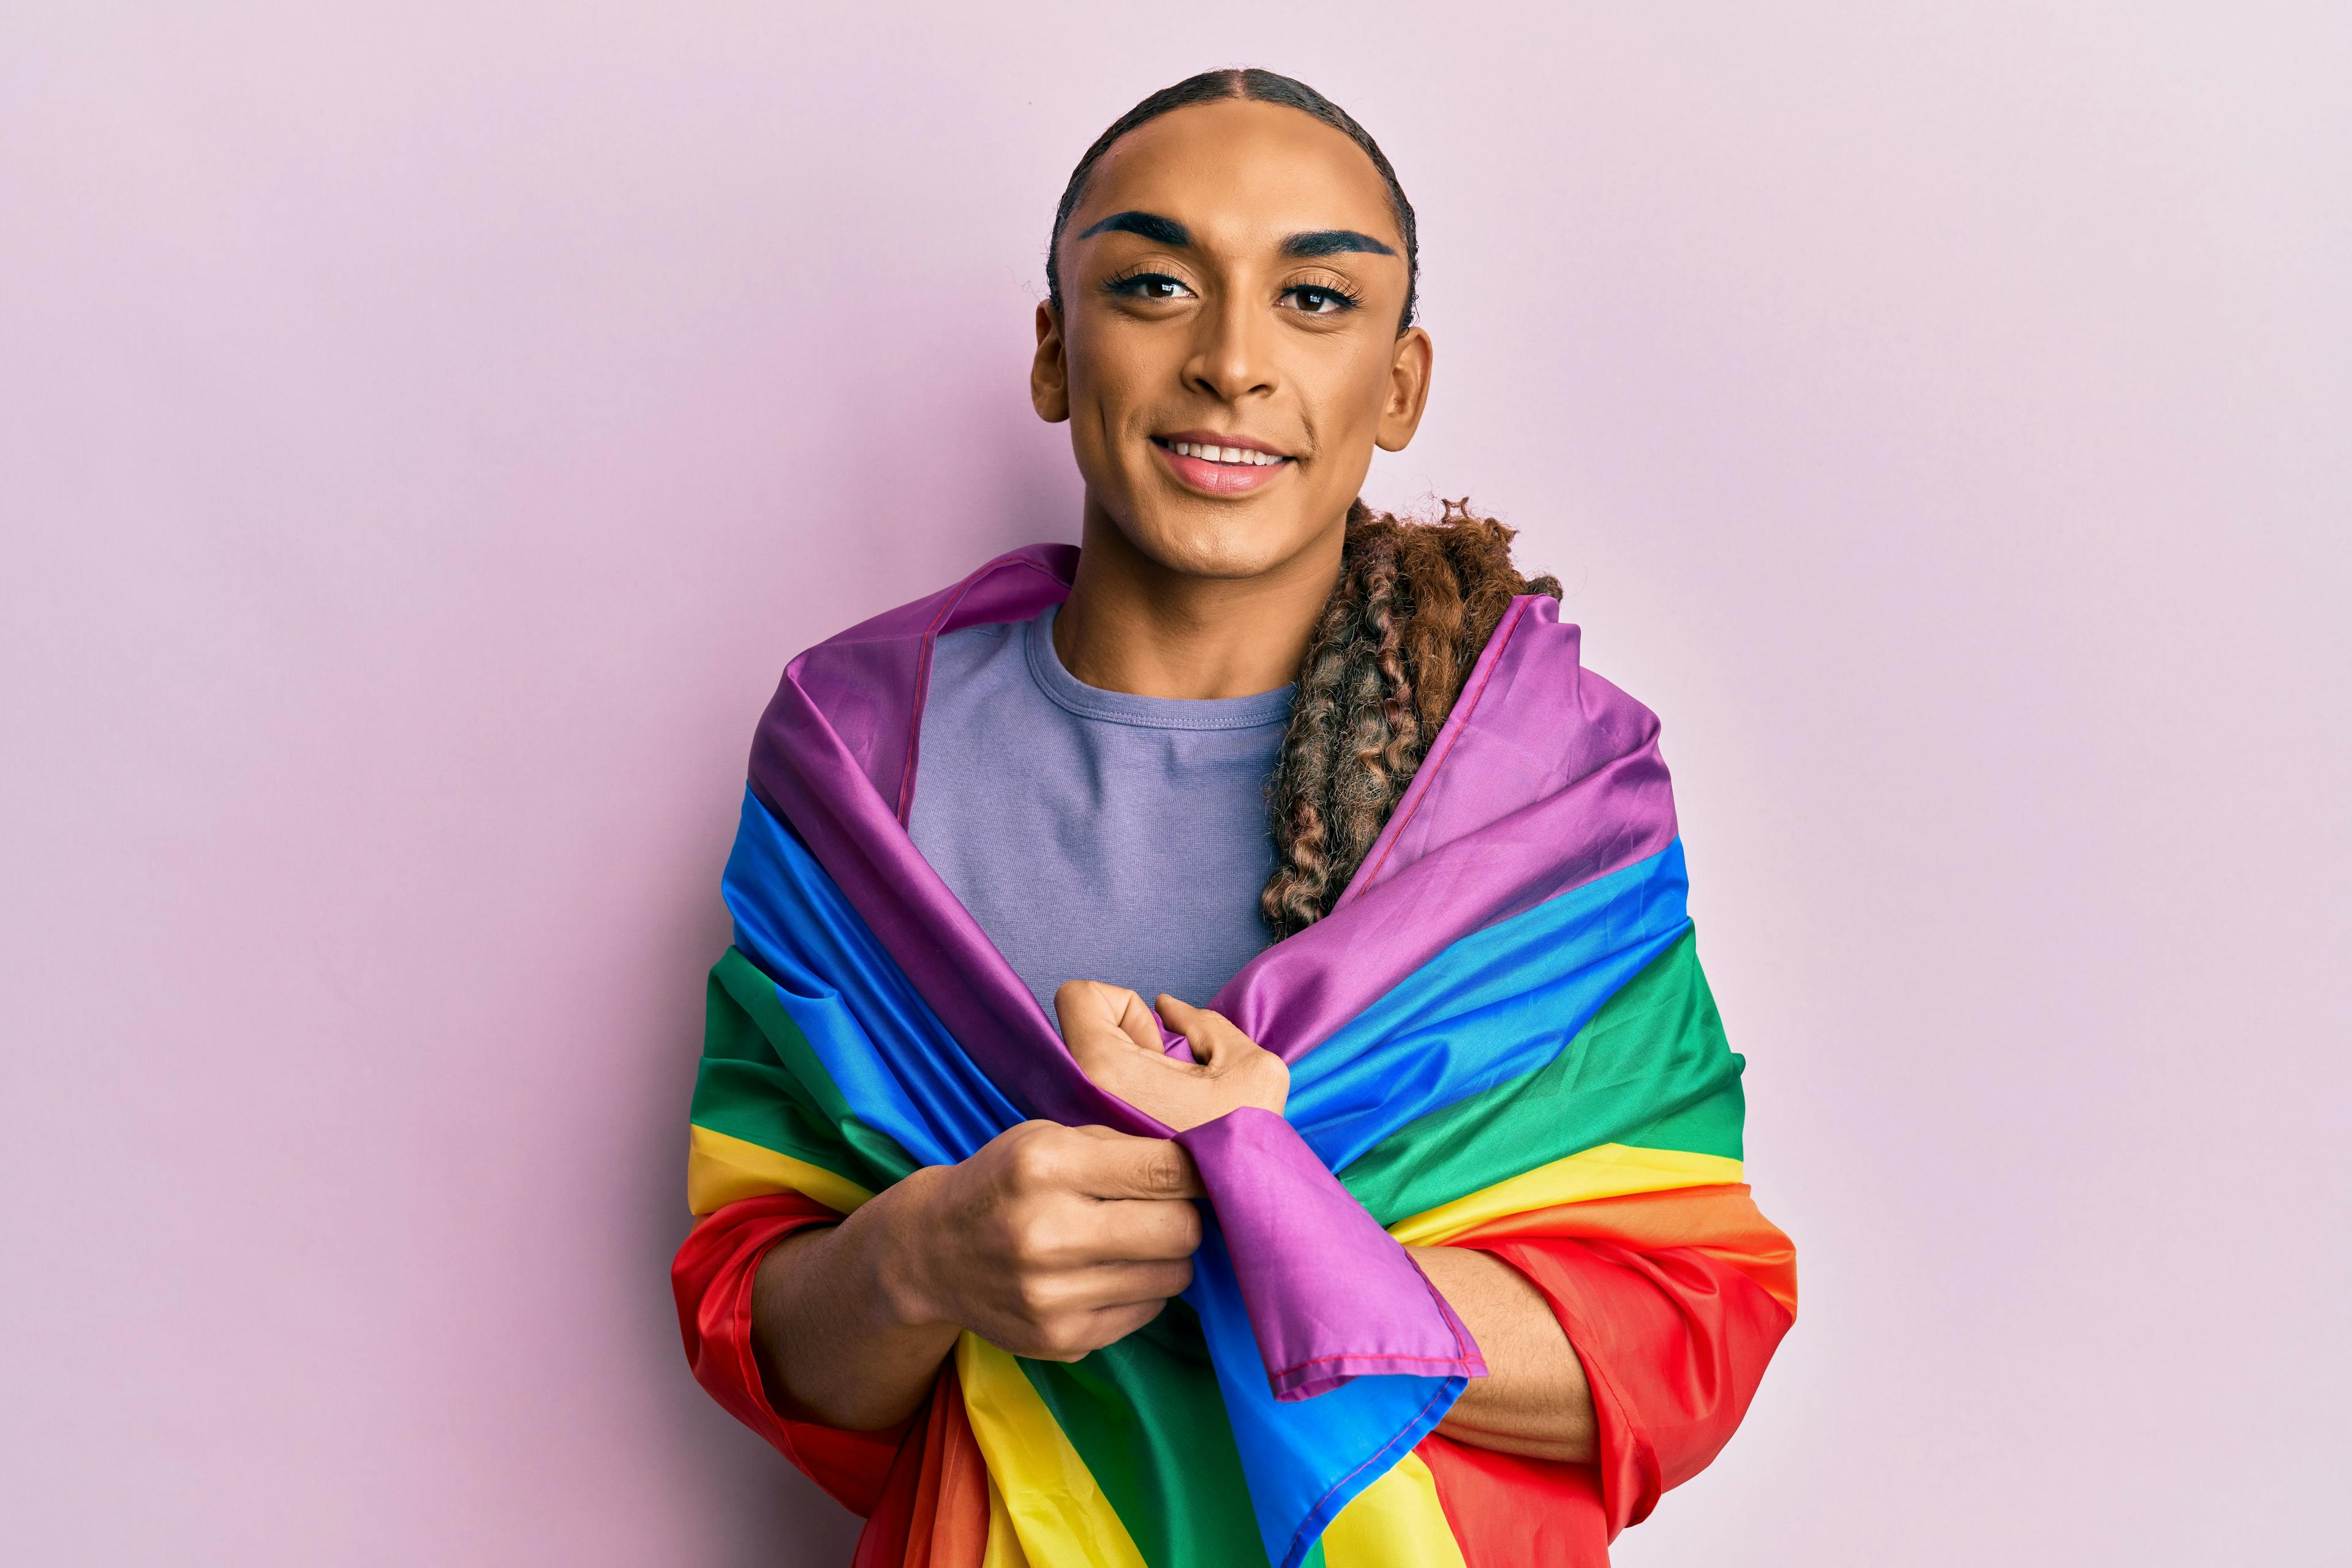  Reduce Care Disparities for LGBTQ Patients with Simple Steps